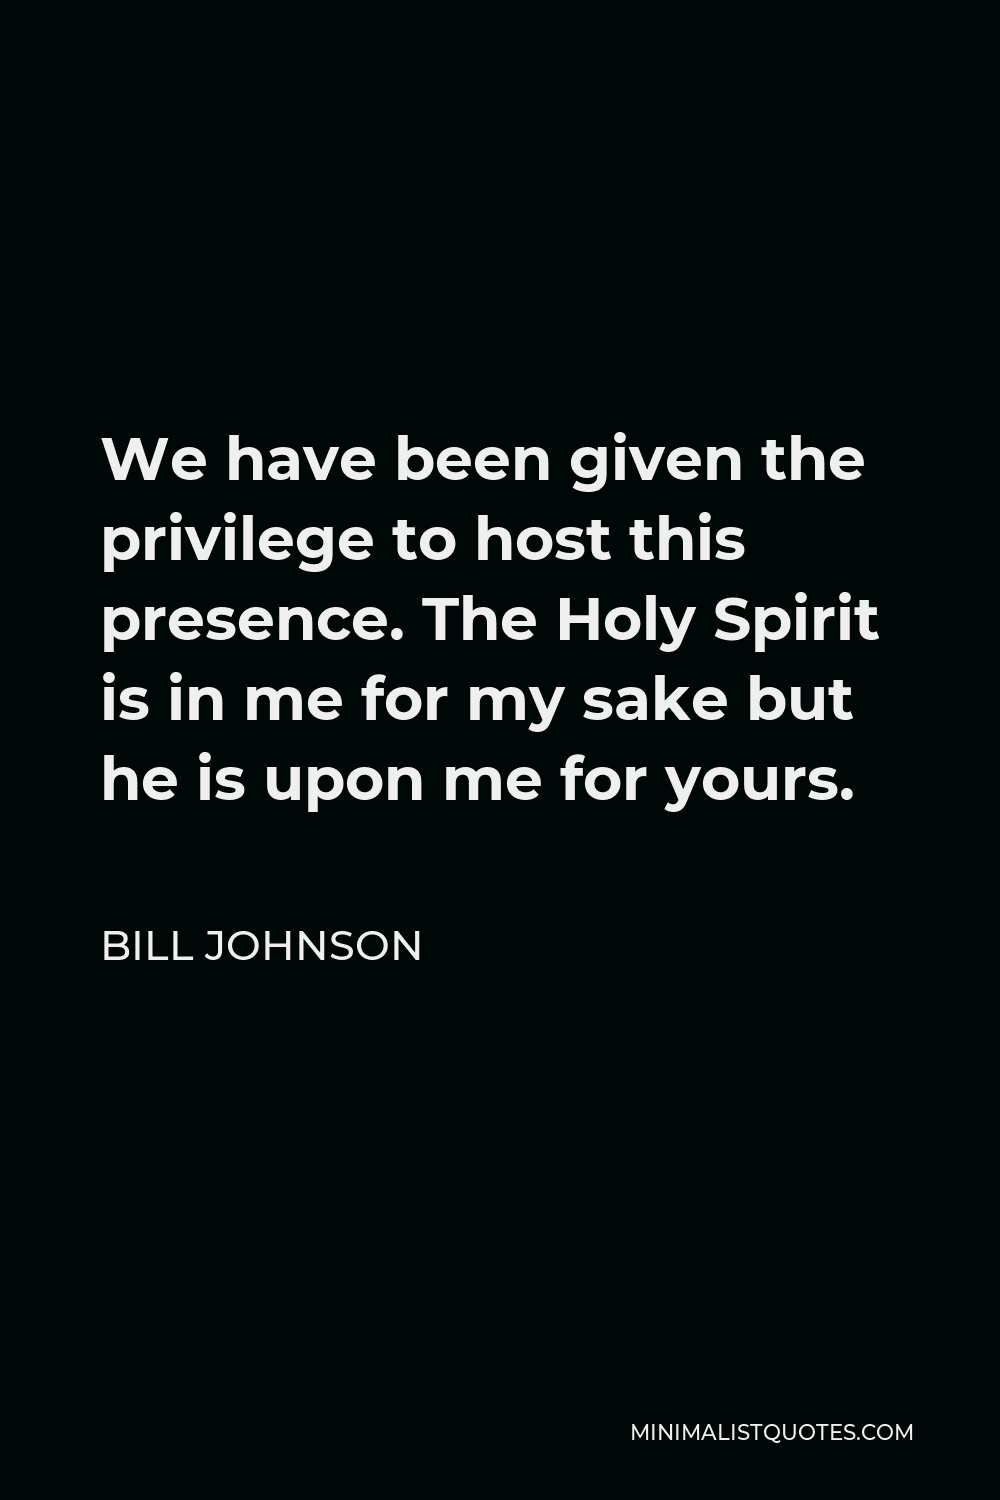 Bill Johnson Quote - We have been given the privilege to host this presence. The Holy Spirit is in me for my sake but he is upon me for yours.